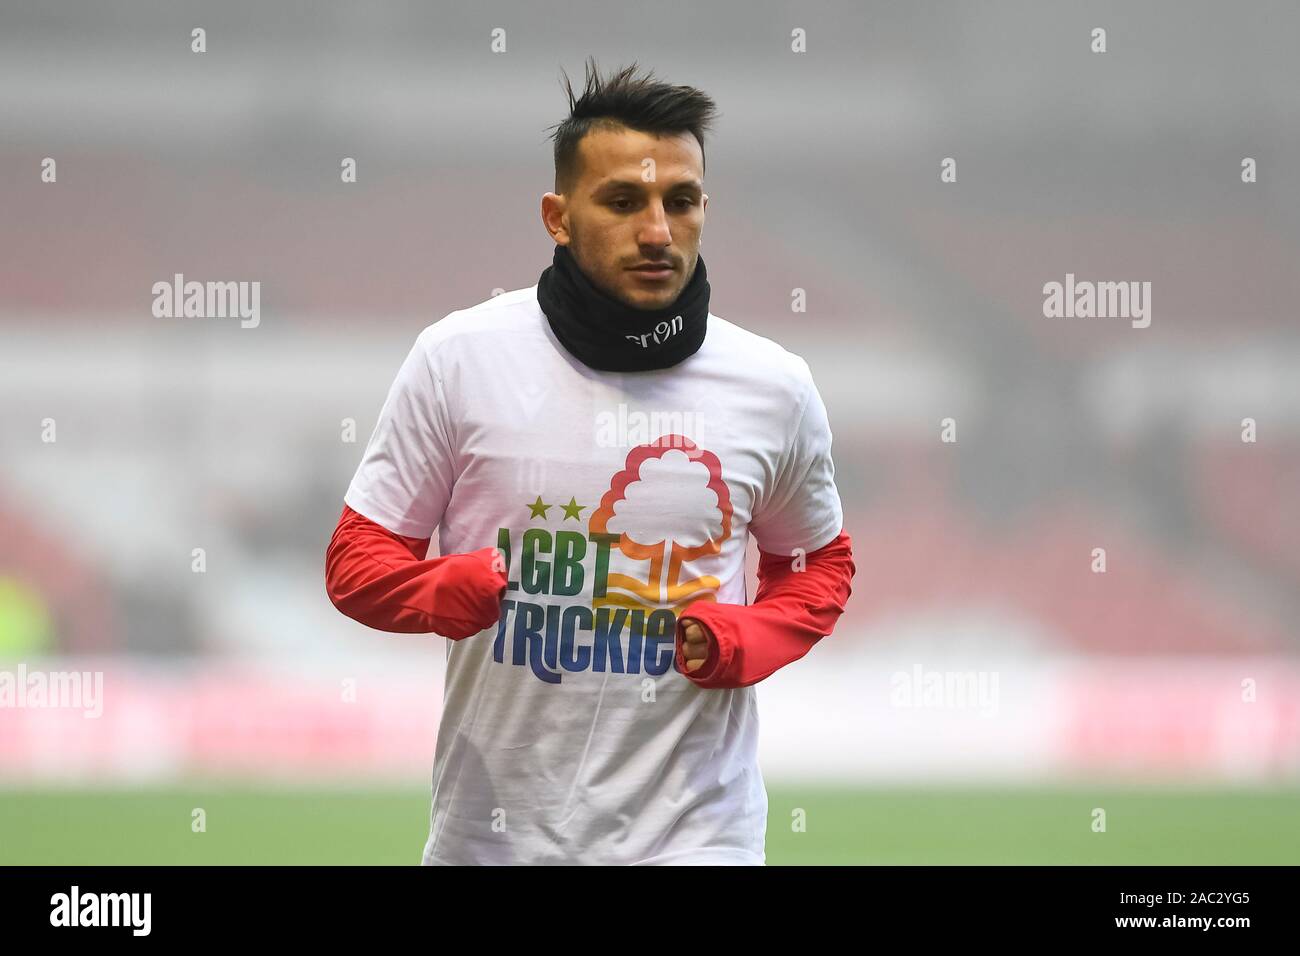 Nottingham, UK. 30th Nov, 2019. Joao Carvalho (10) of Nottingham Forest warms up with LBGT Trickies logo, showing support for the LBGT community during the Sky Bet Championship match between Nottingham Forest and Cardiff City at the City Ground, Nottingham on Saturday 30th November 2019. (Credit: Jon Hobley | MI News) Photograph may only be used for newspaper and/or magazine editorial purposes, license required for commercial use Credit: MI News & Sport /Alamy Live News Credit: MI News & Sport /Alamy Live News Credit: MI News & Sport /Alamy Live News Stock Photo